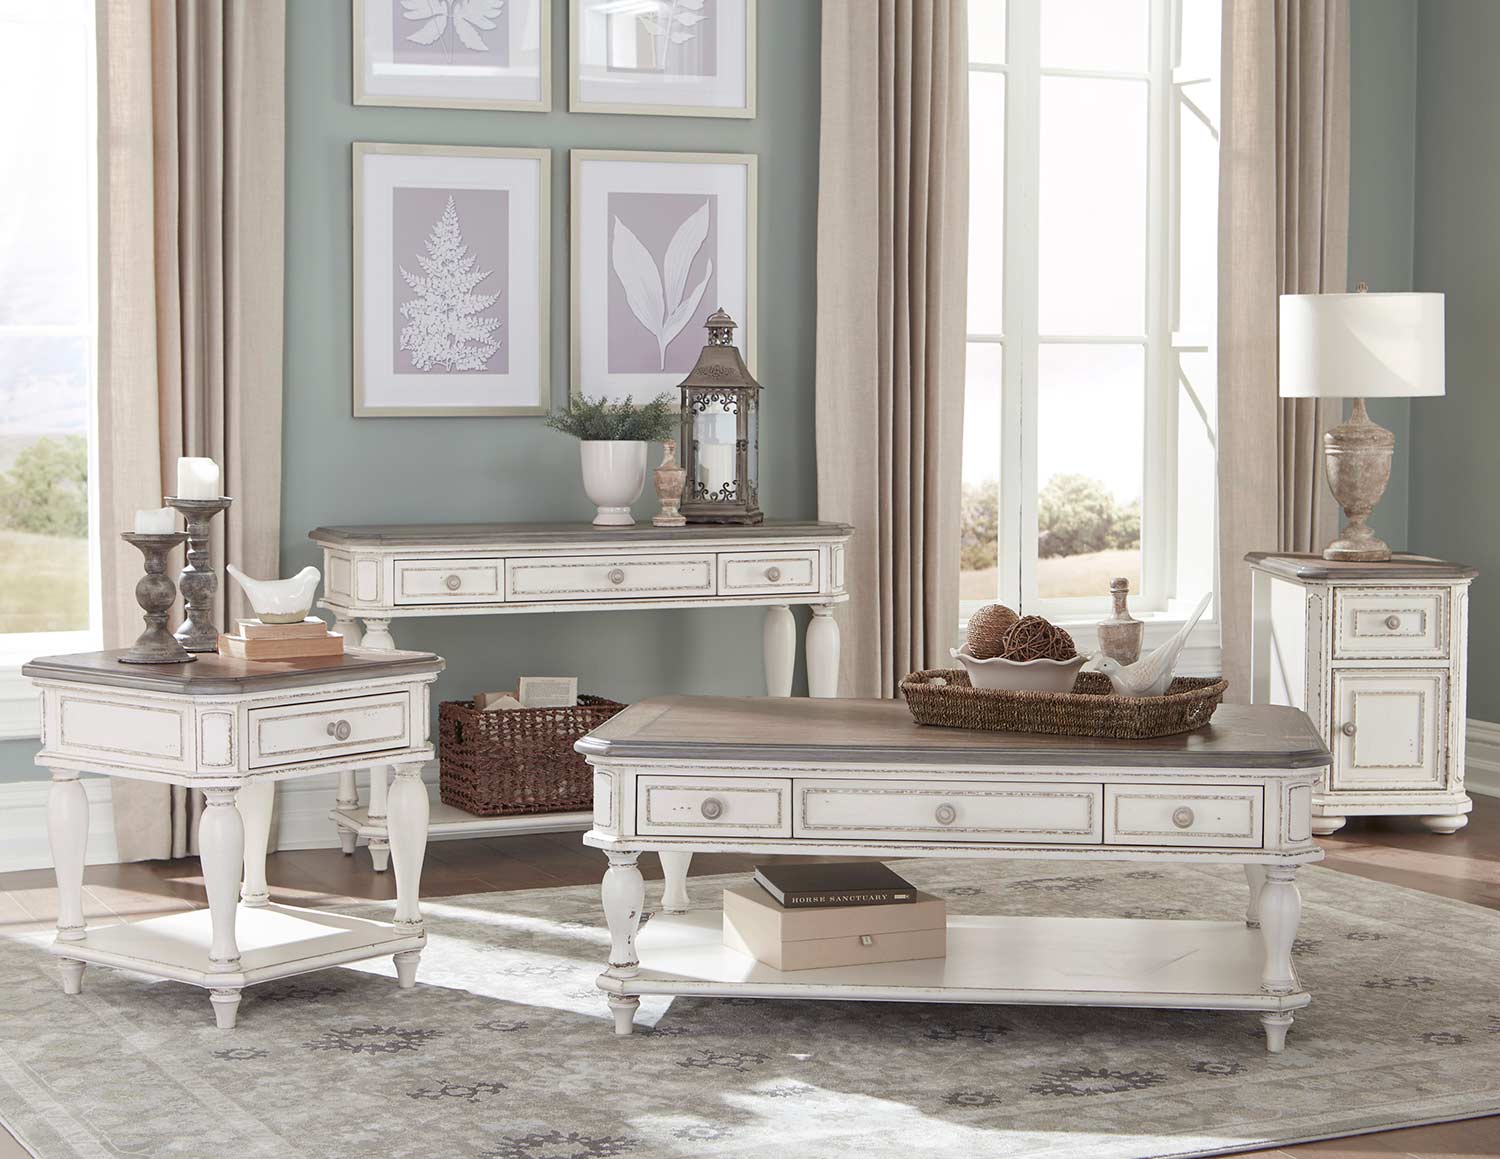 Homelegance Willowick Collection - Antique White Rub-Through/Brown Cherry Tops